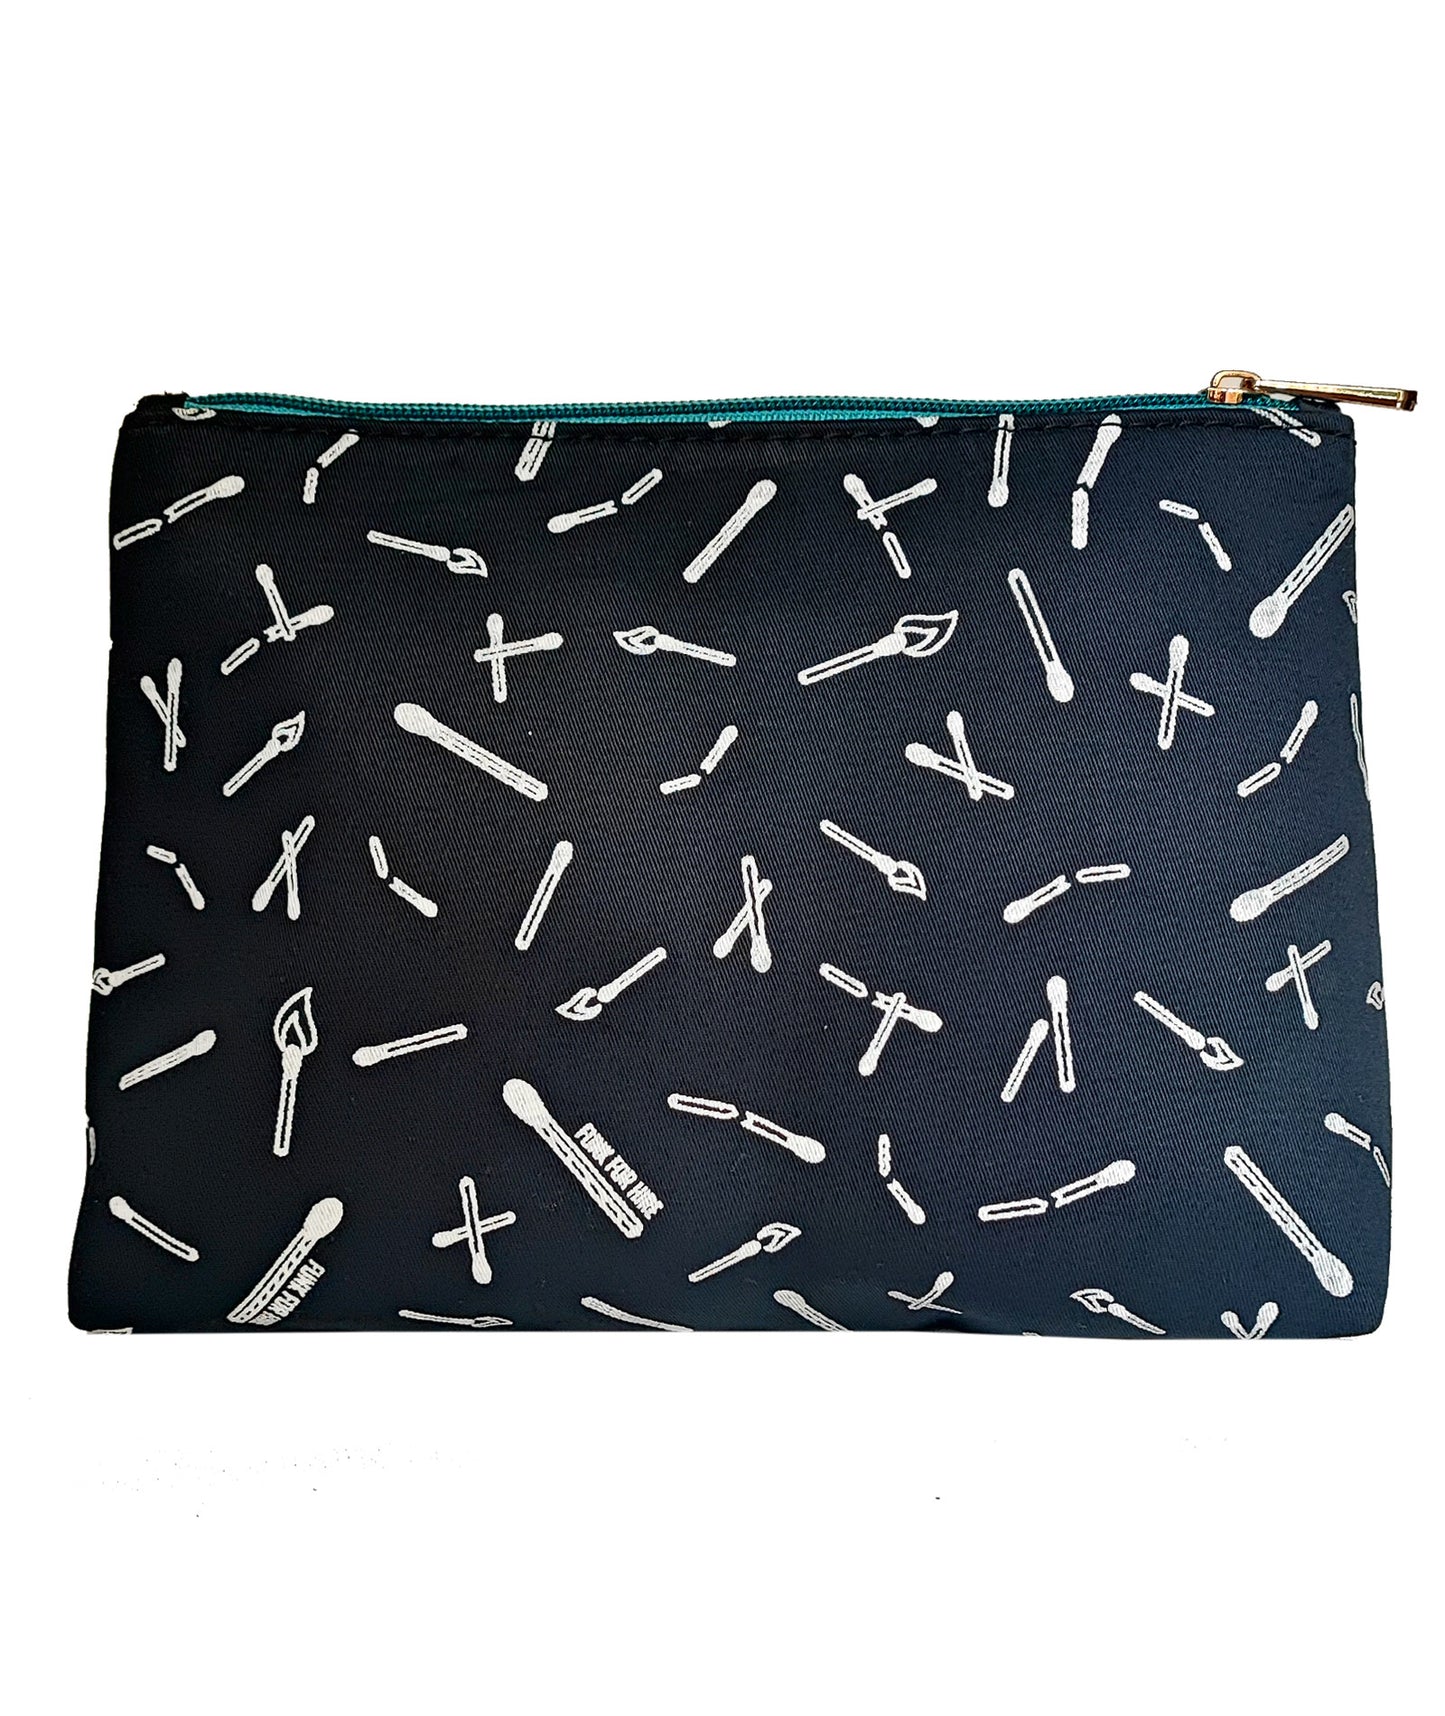 Match Stick Printed Canvas Travel Pouch Navy